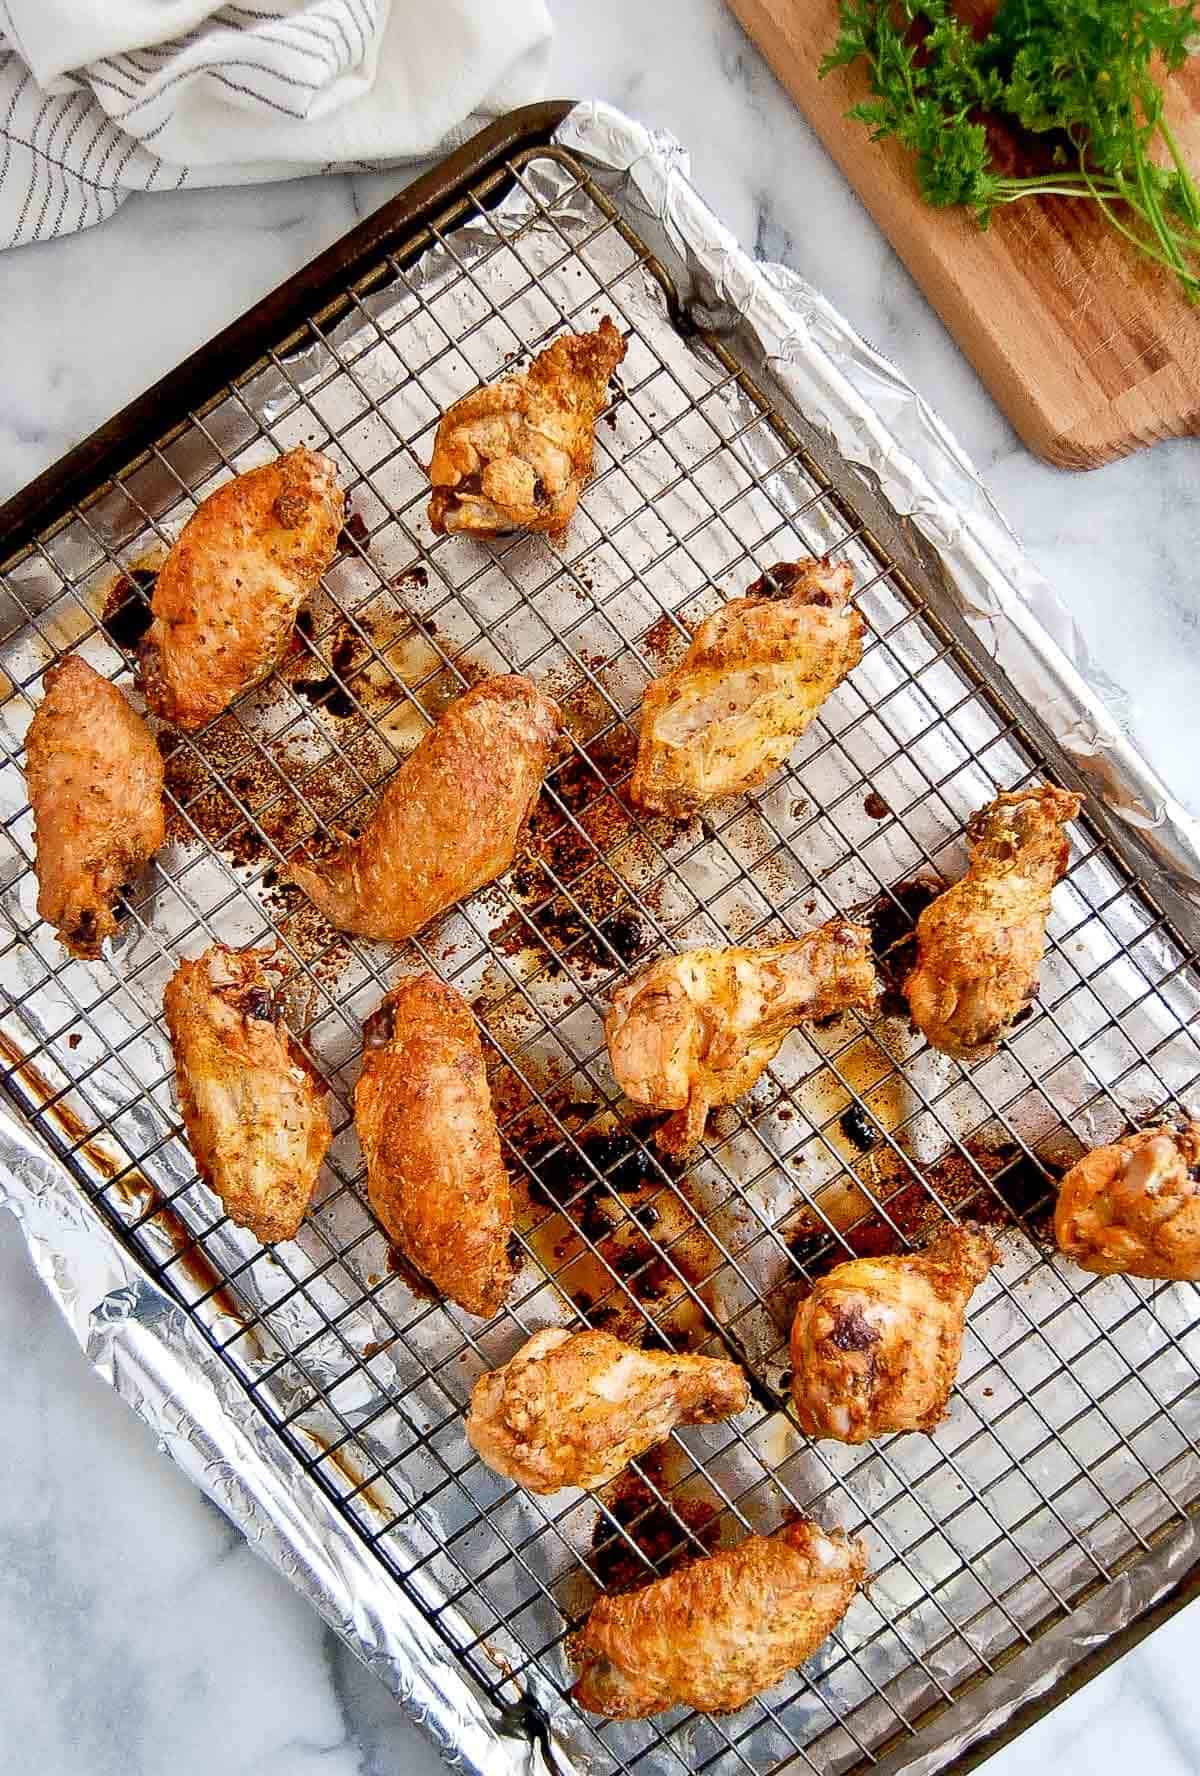 partially baked chicken wings, before sauce is added.